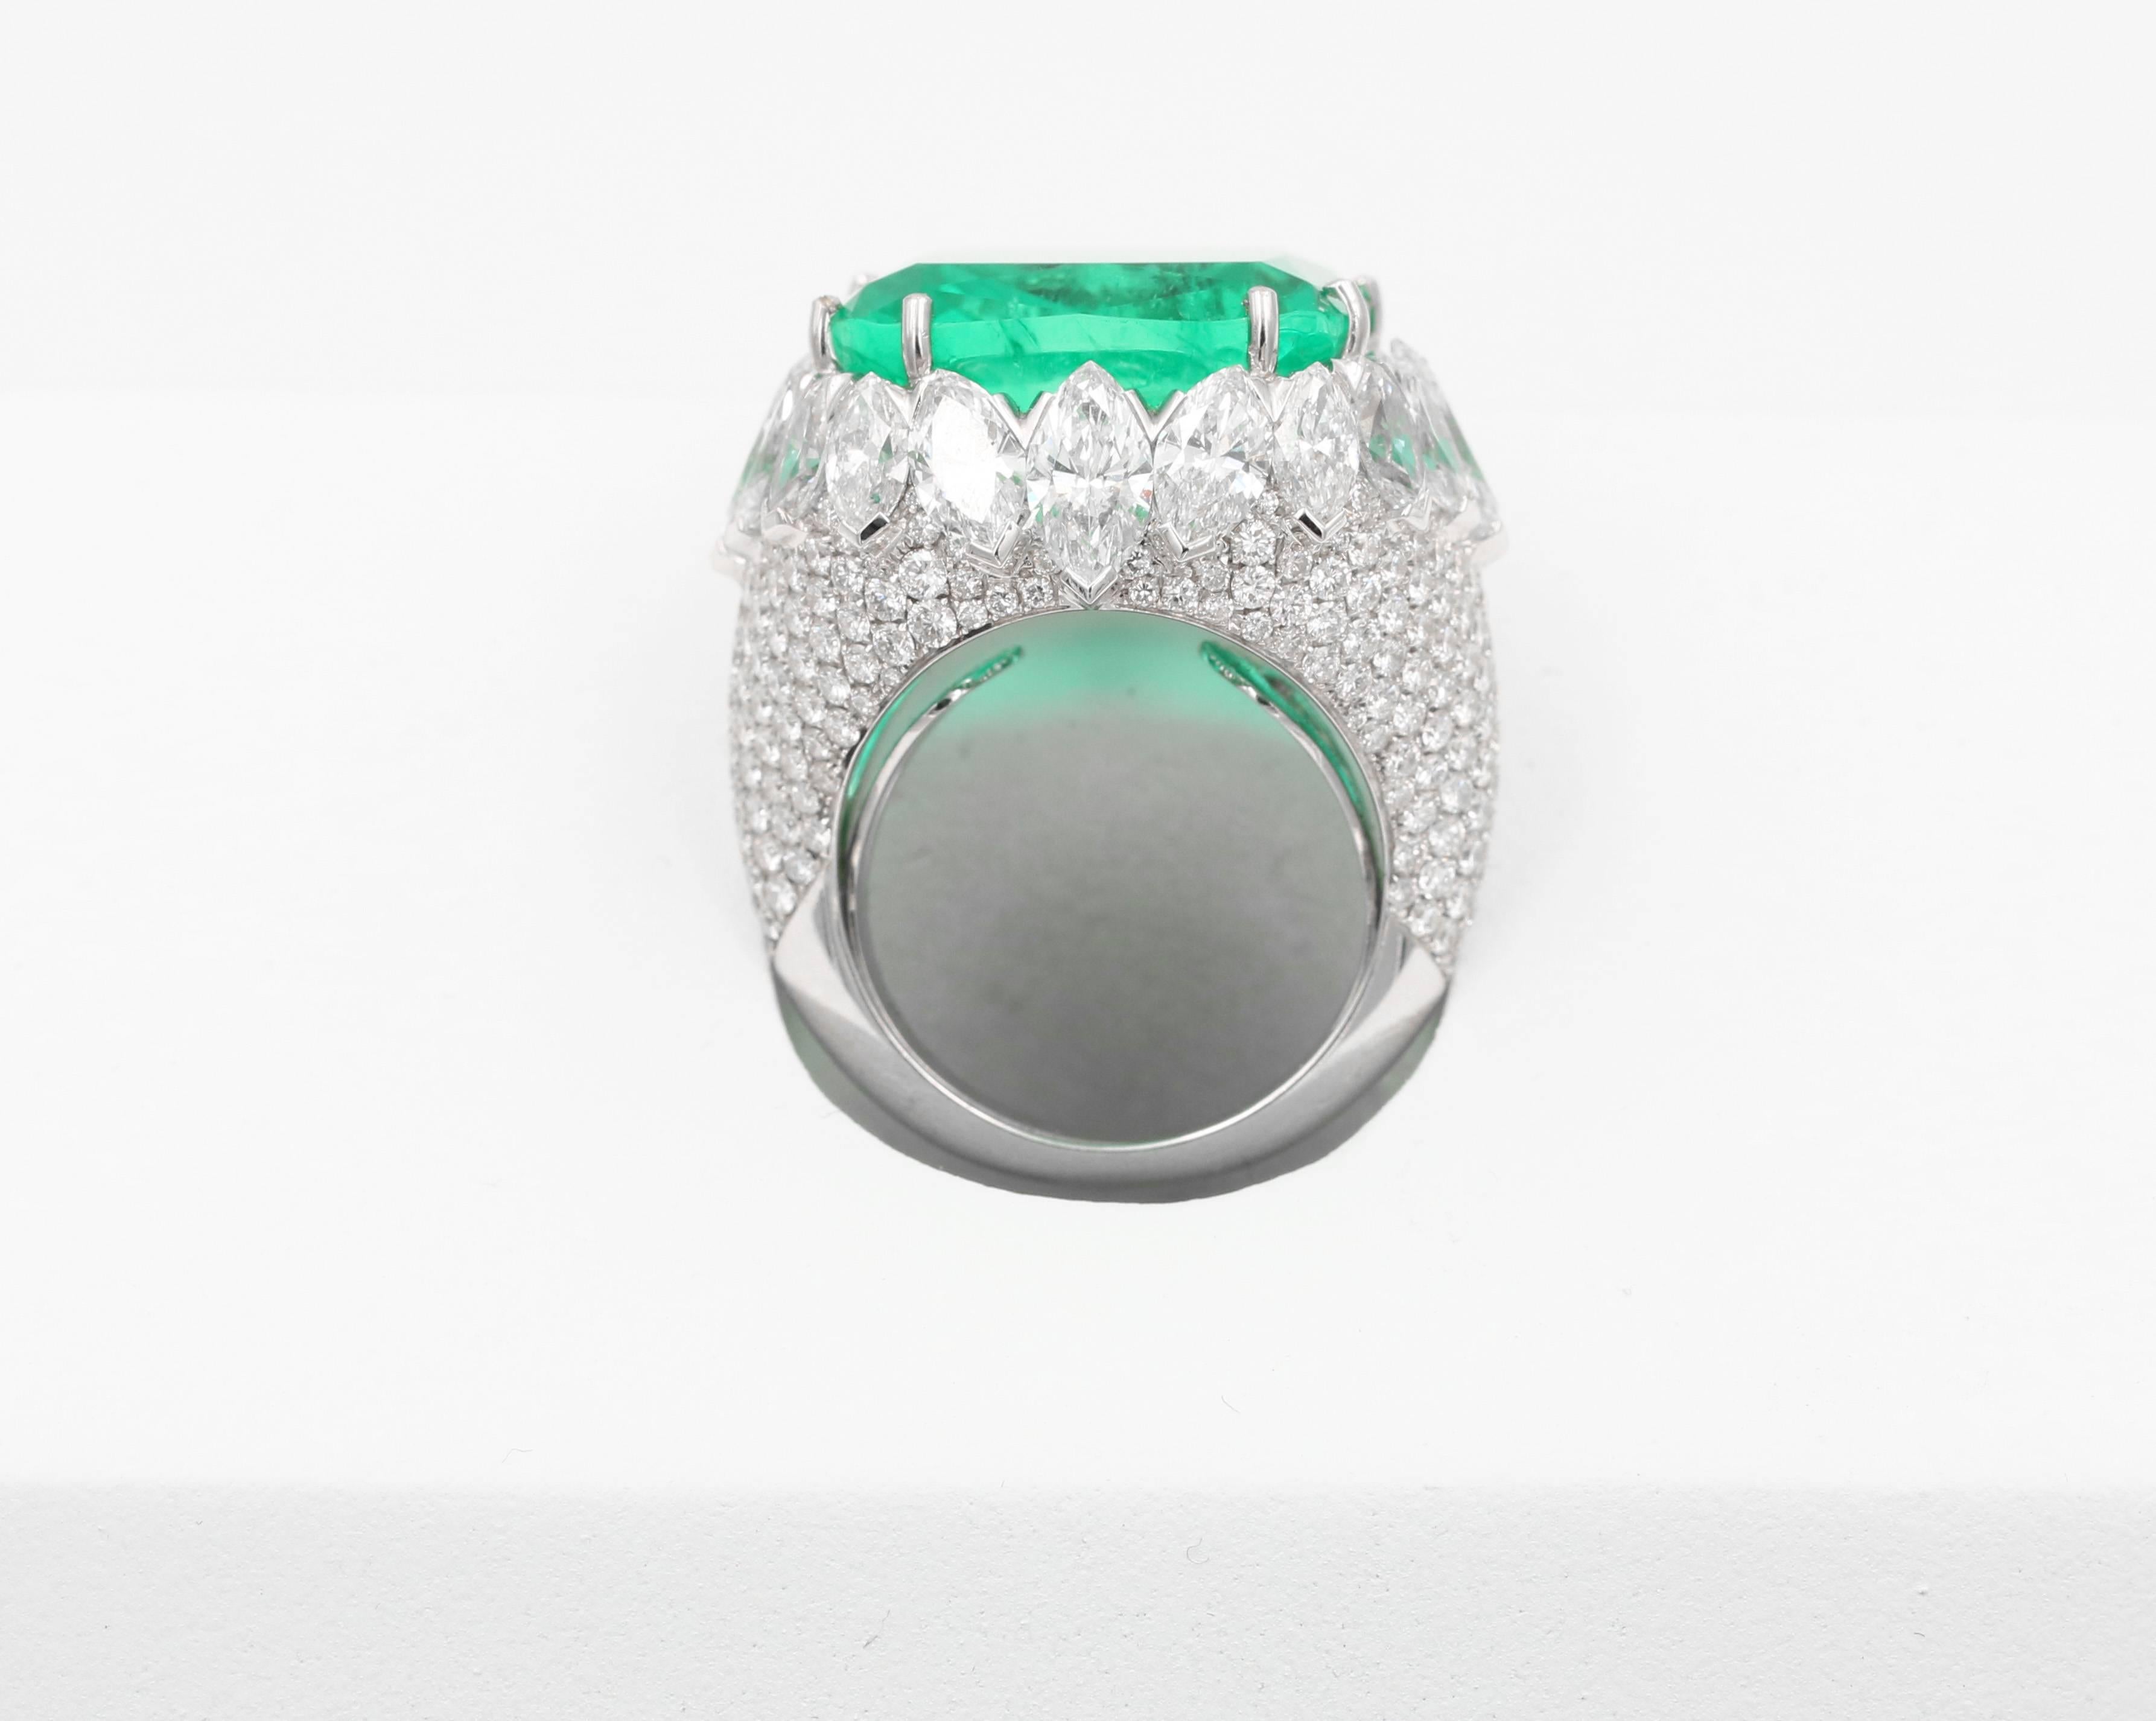 18K white gold 25.45 ct Colombian cushion emerald and diamond ring
GRS Certificate GRS2017-037541 “Colombian”, “Insignificant Oil” 
GIA Certificate 5181819629 “Colombian” “Minor Oil”
